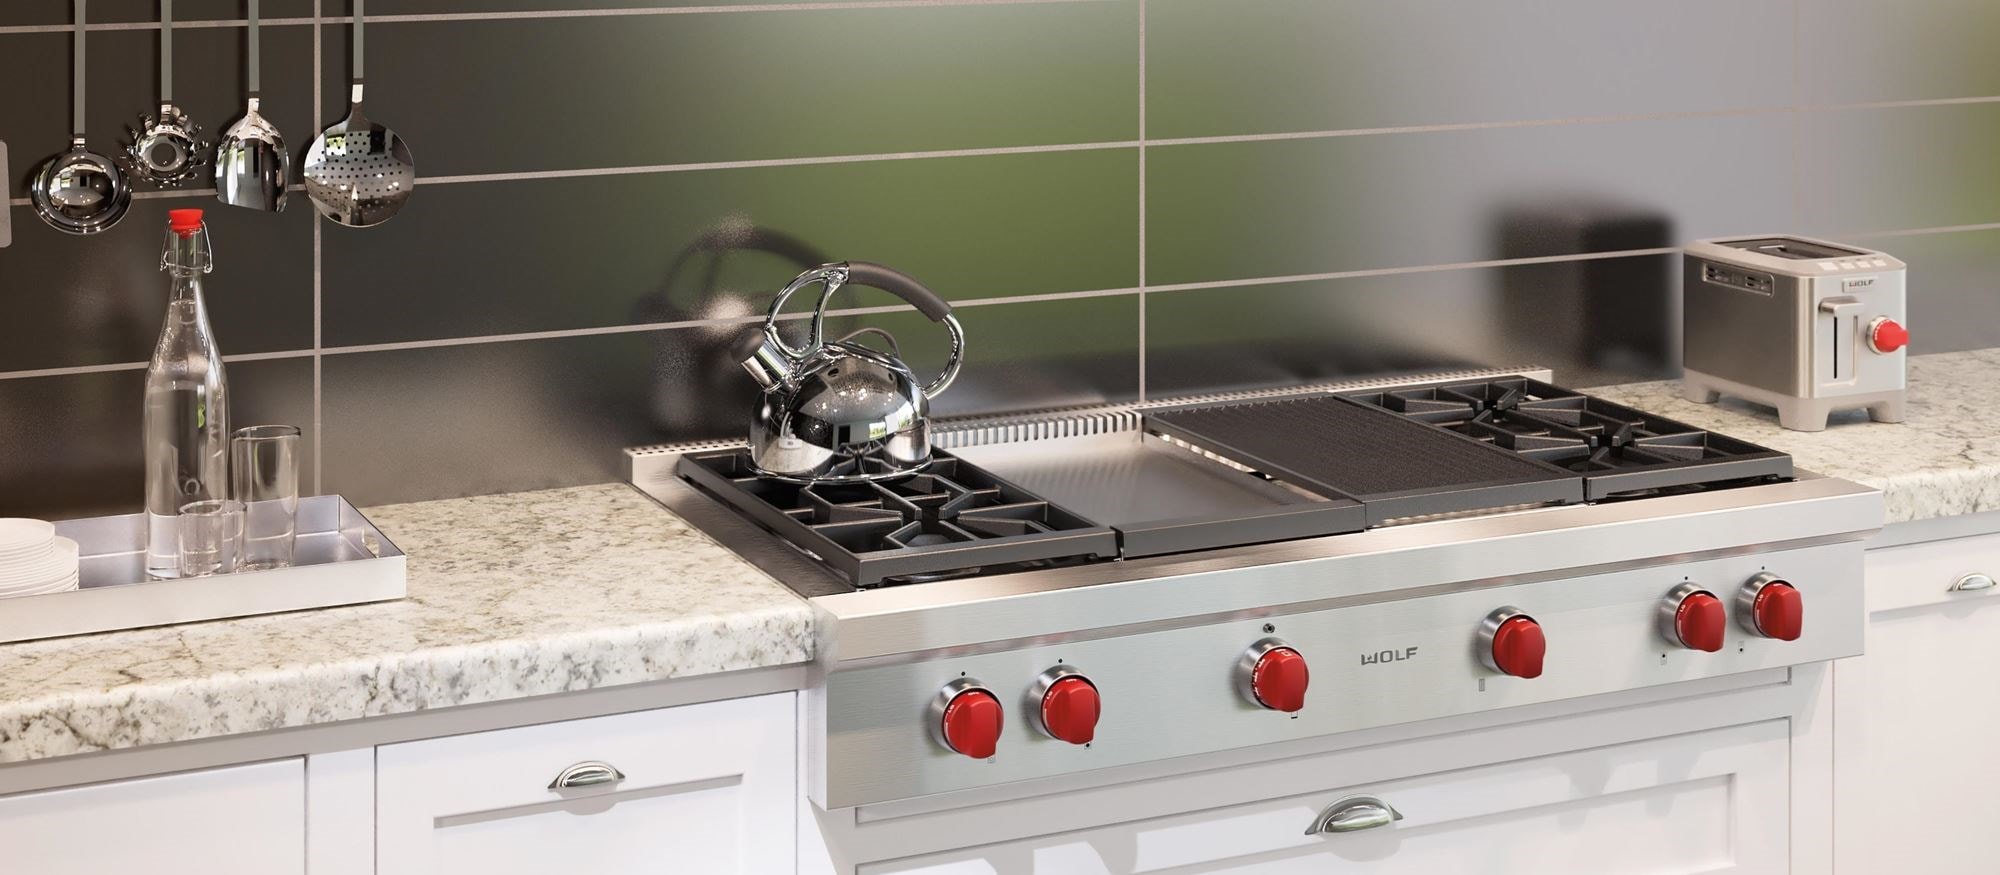 48 Gas Range - 4 Burners and Infrared Dual Griddle